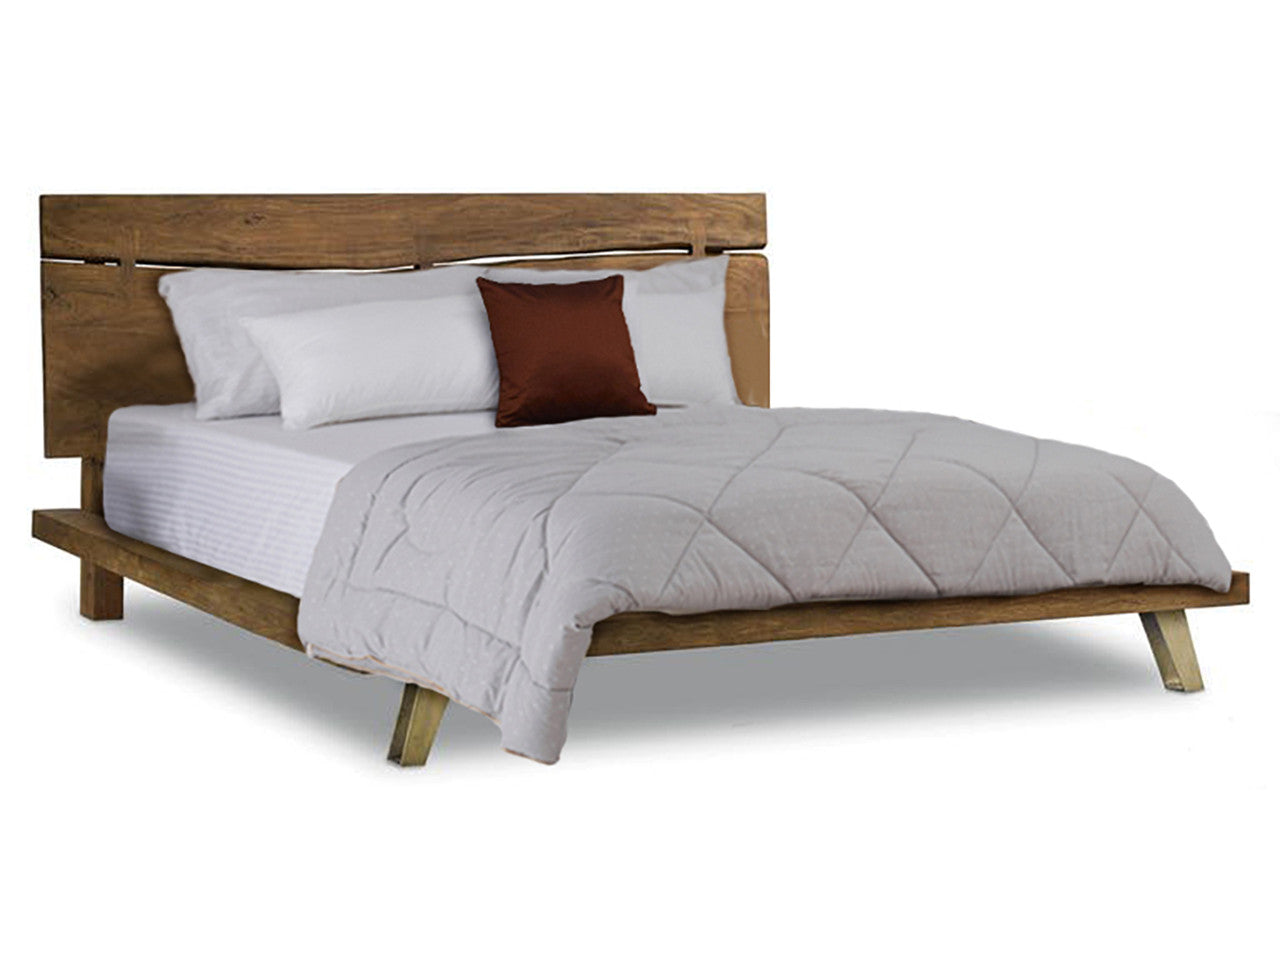 AFD Home Mountain Studio Modern Rustic Live Edge Plank Queen Bed 12021015